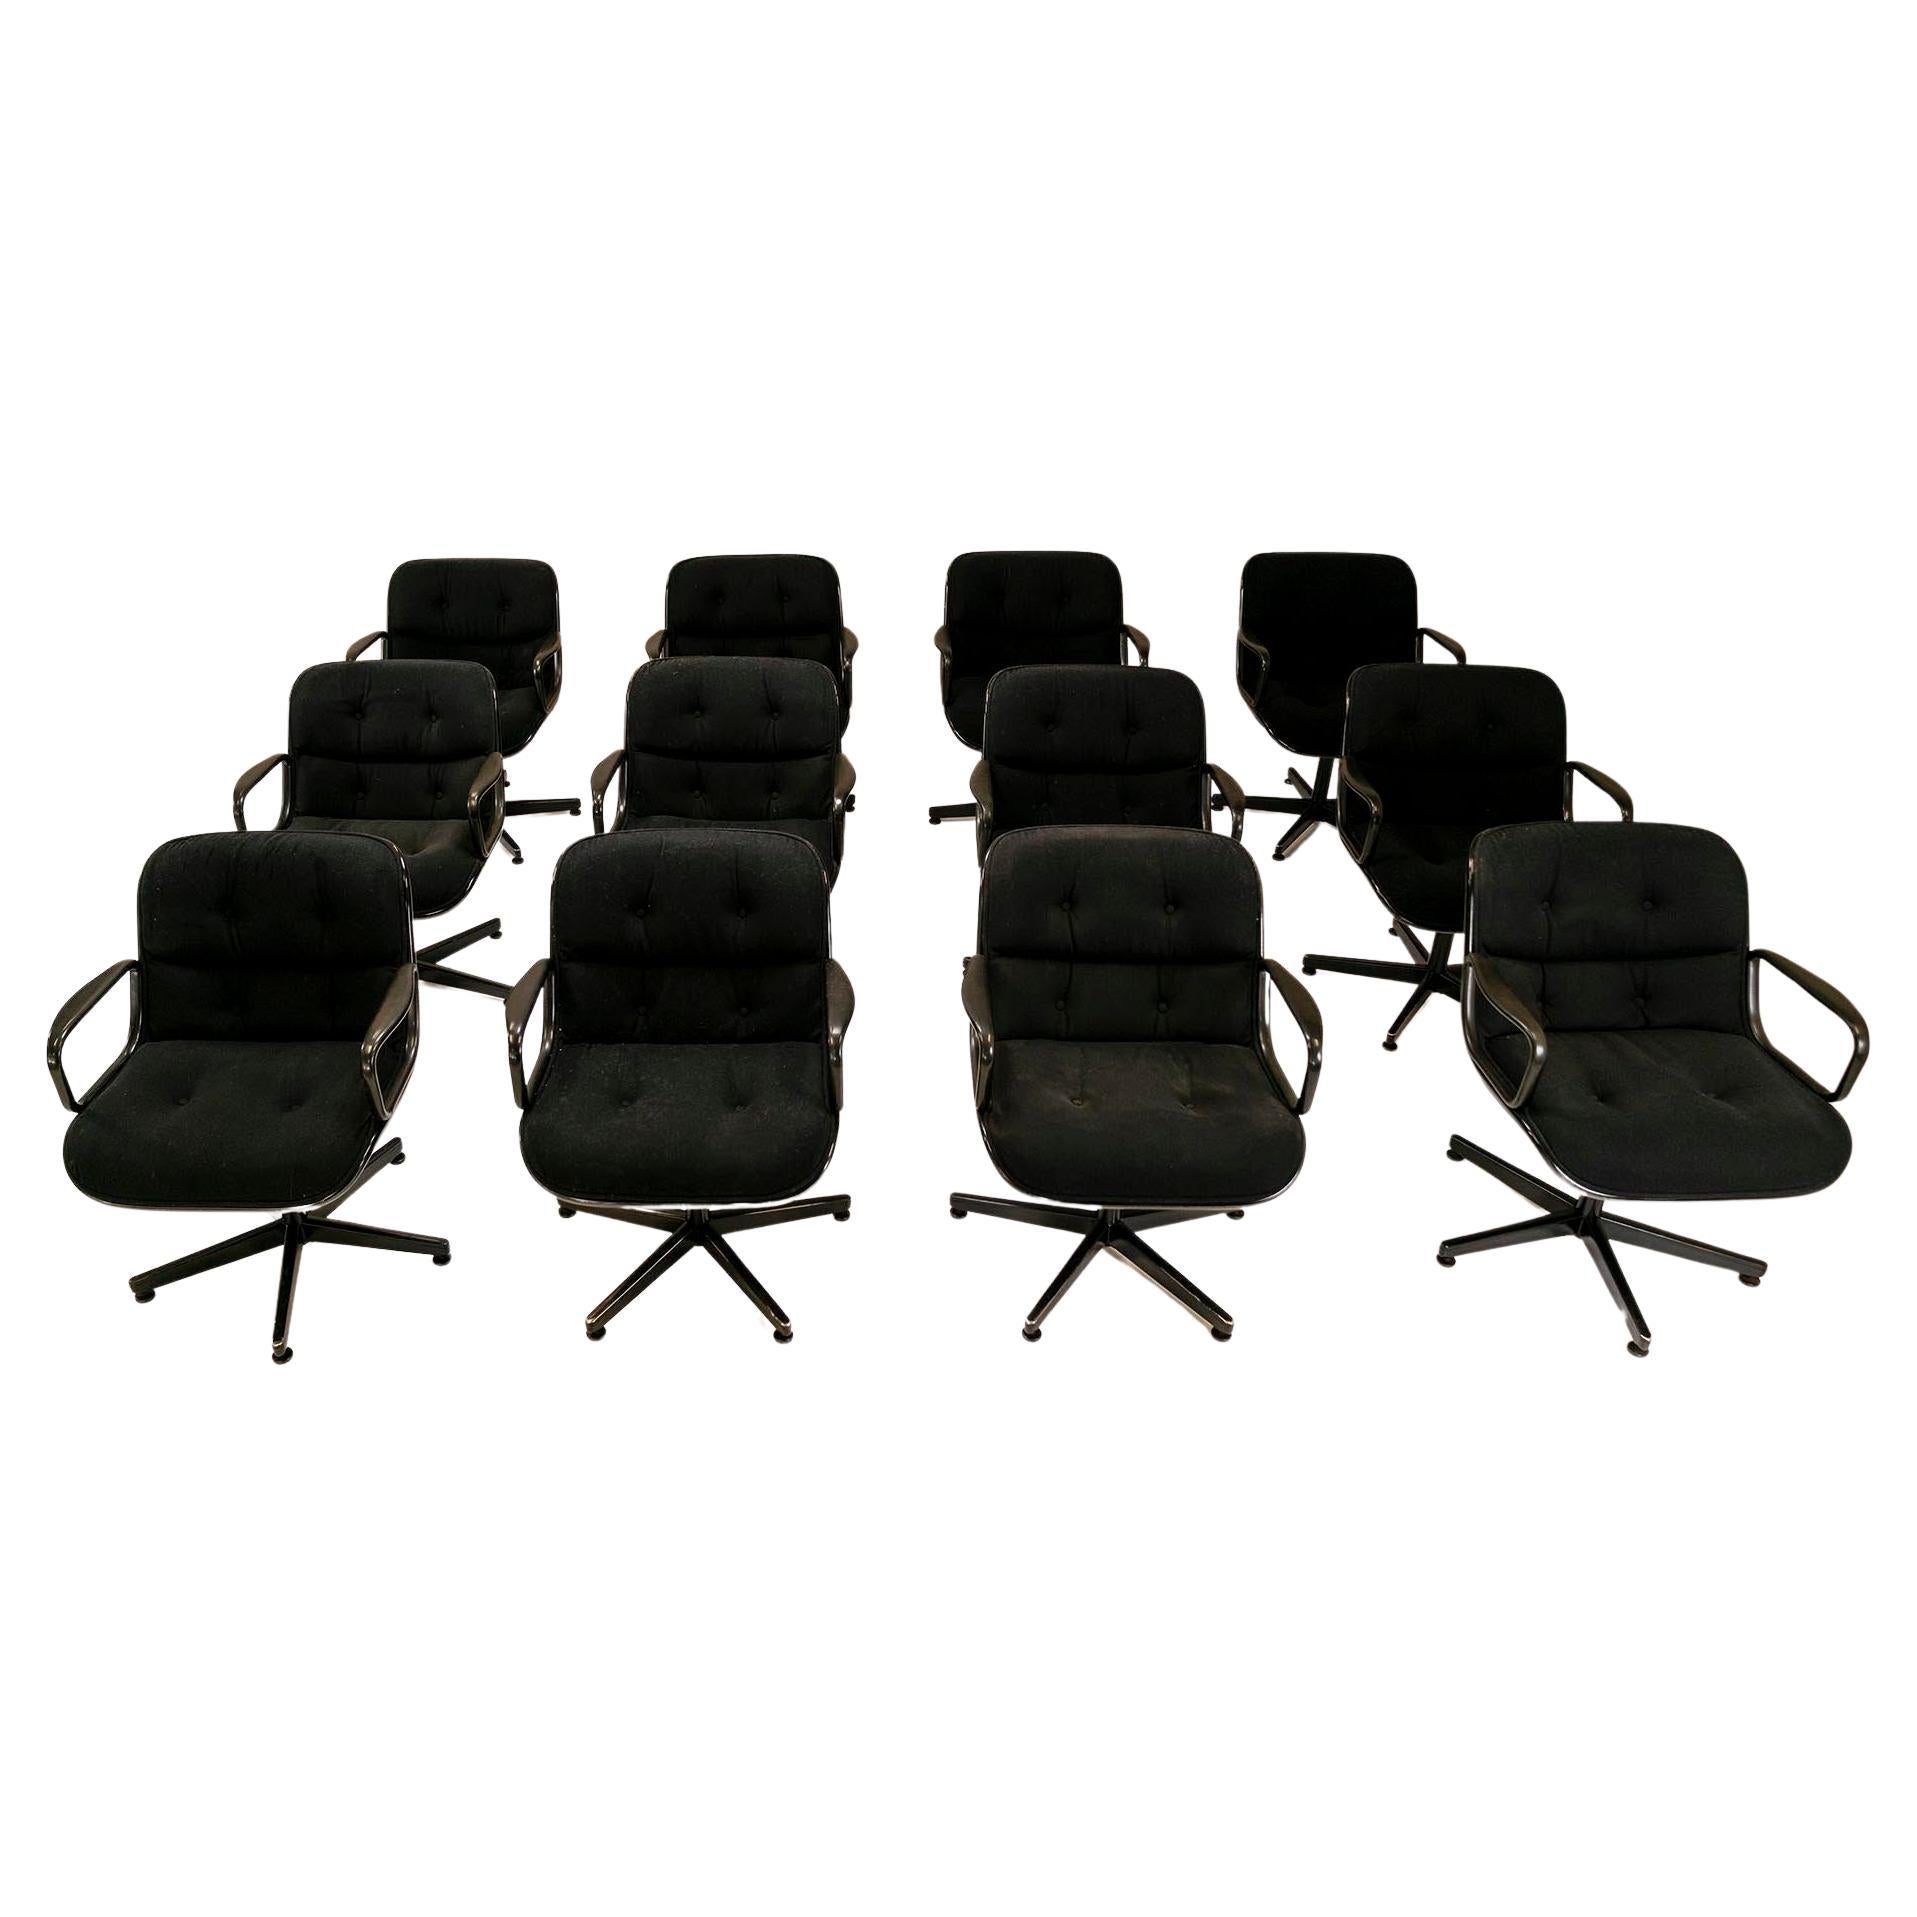 Set of 12 Executive "Pollock" Chairs by Charles Pollock for Knoll, USA, 1963